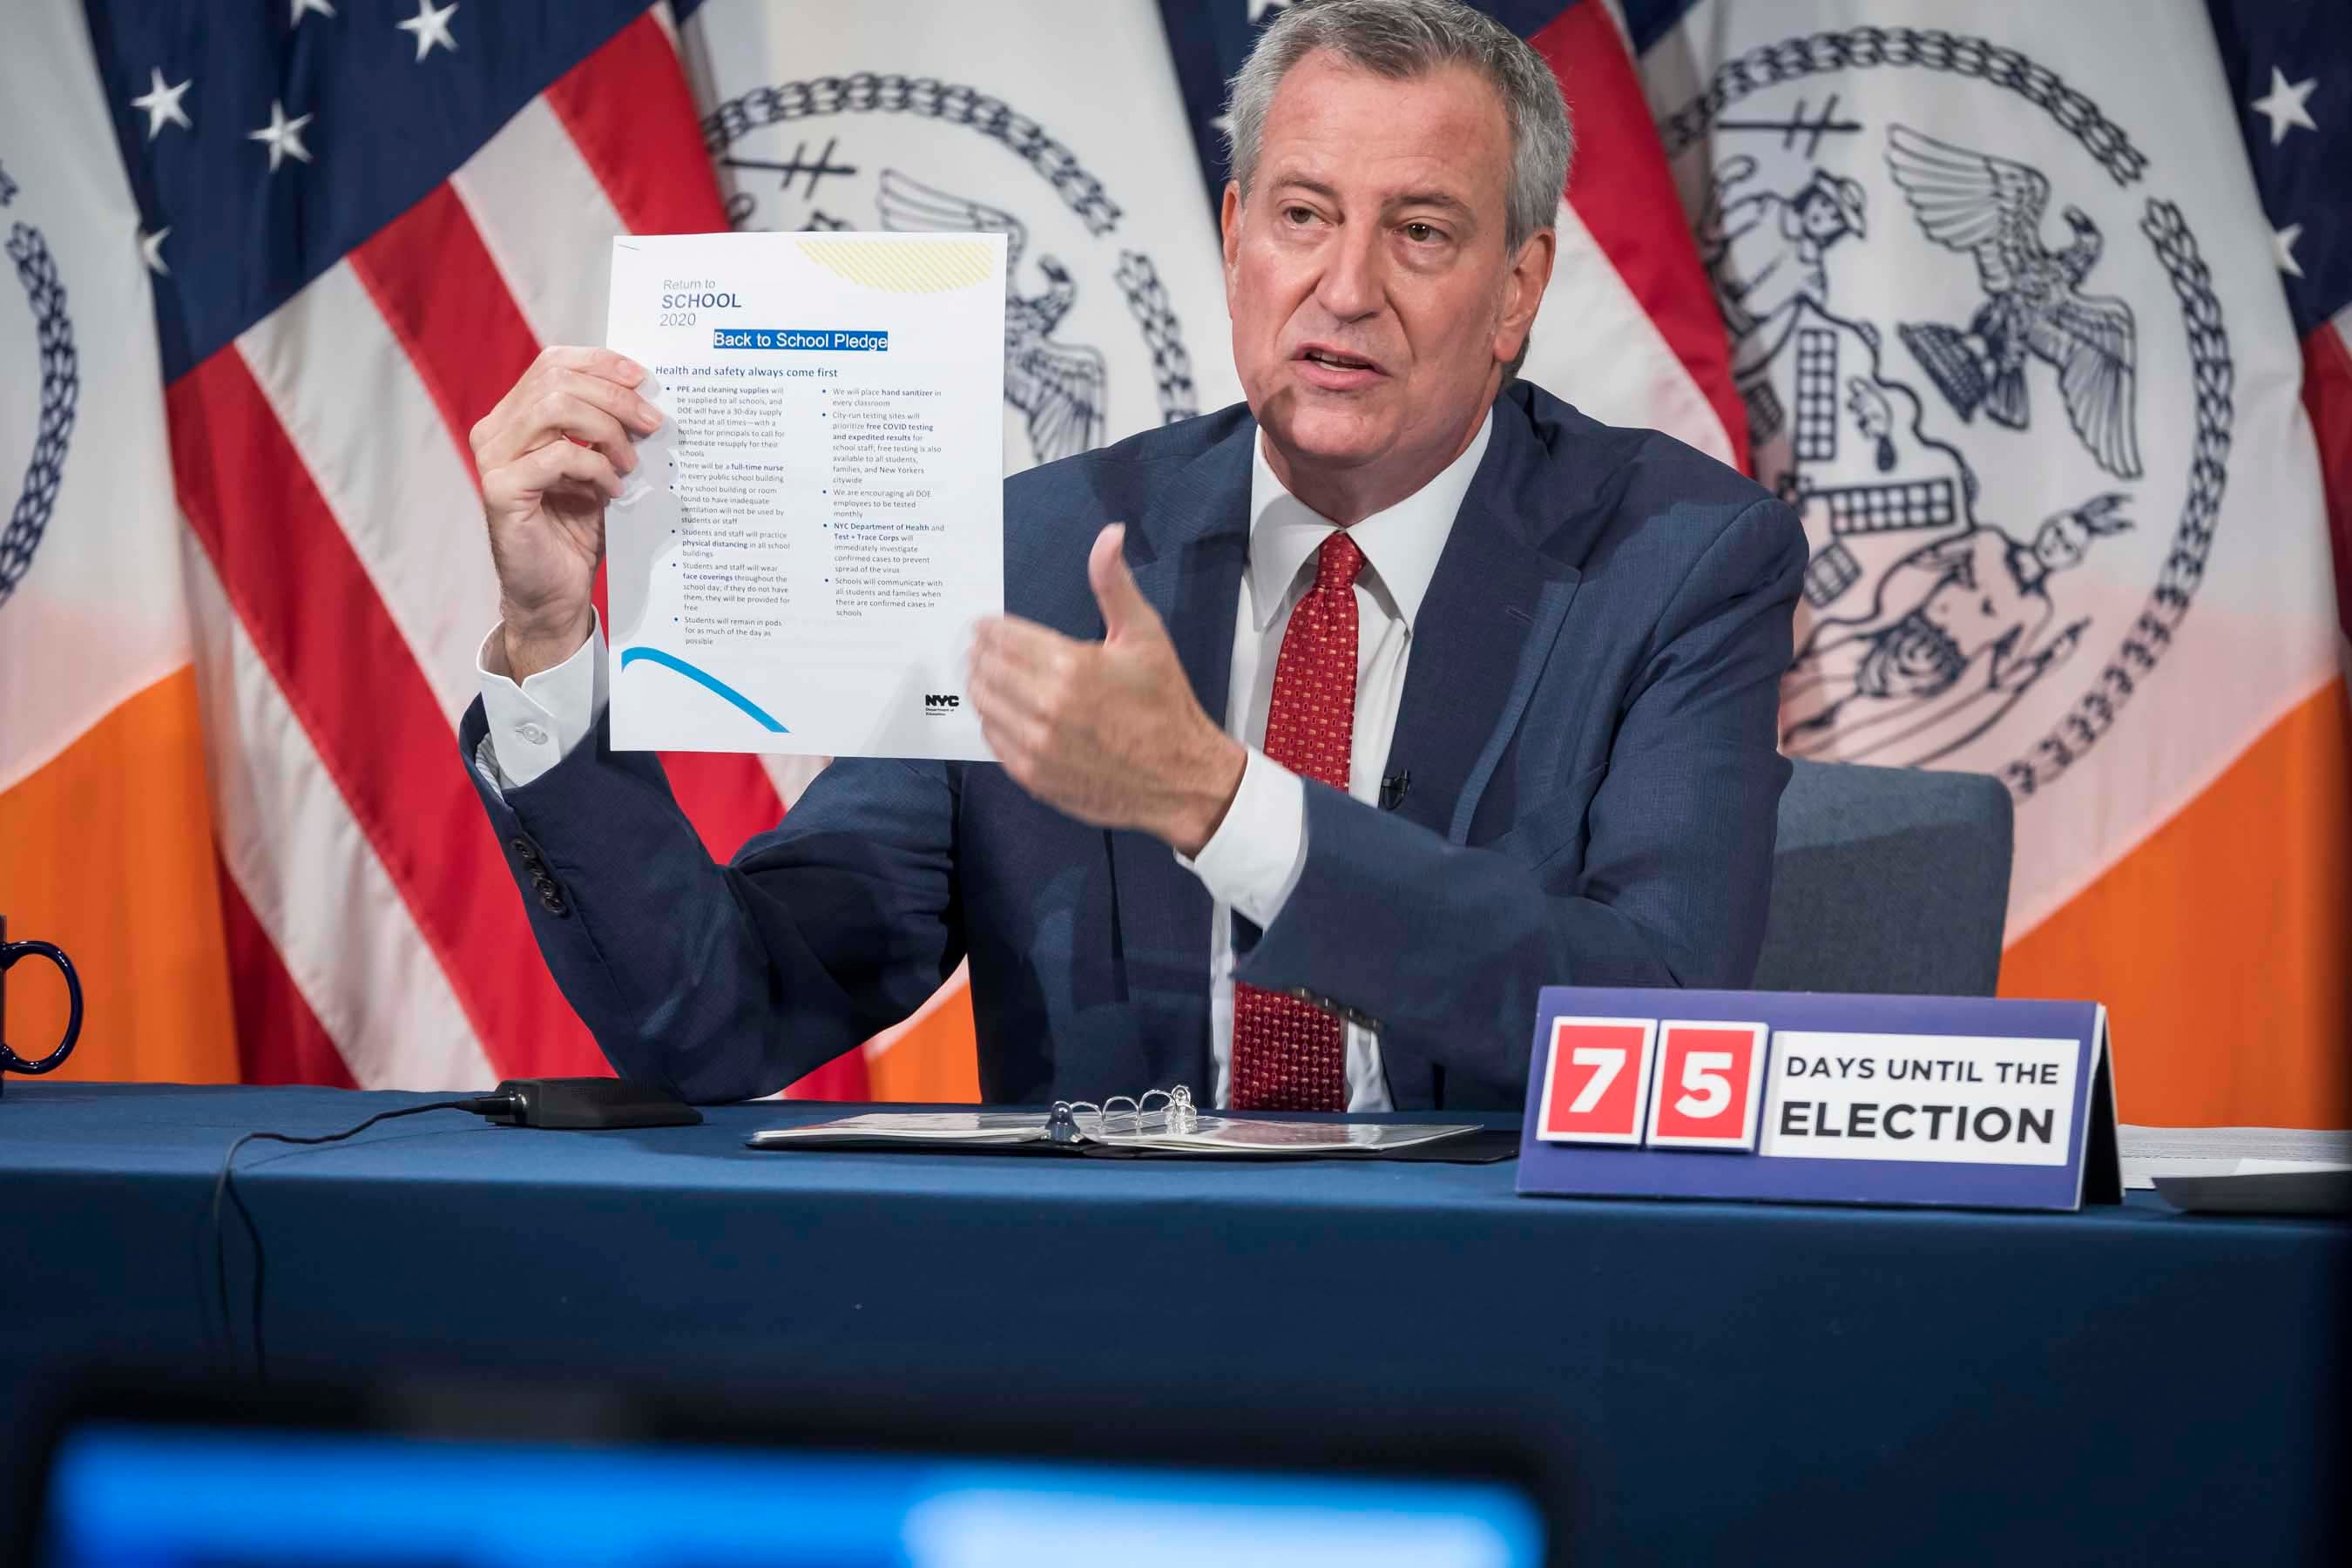 Mayor Bill de Blasio holds a media availability with Schools Chancellor Richard Carranza and others at City Hall, Aug. 20, 2020